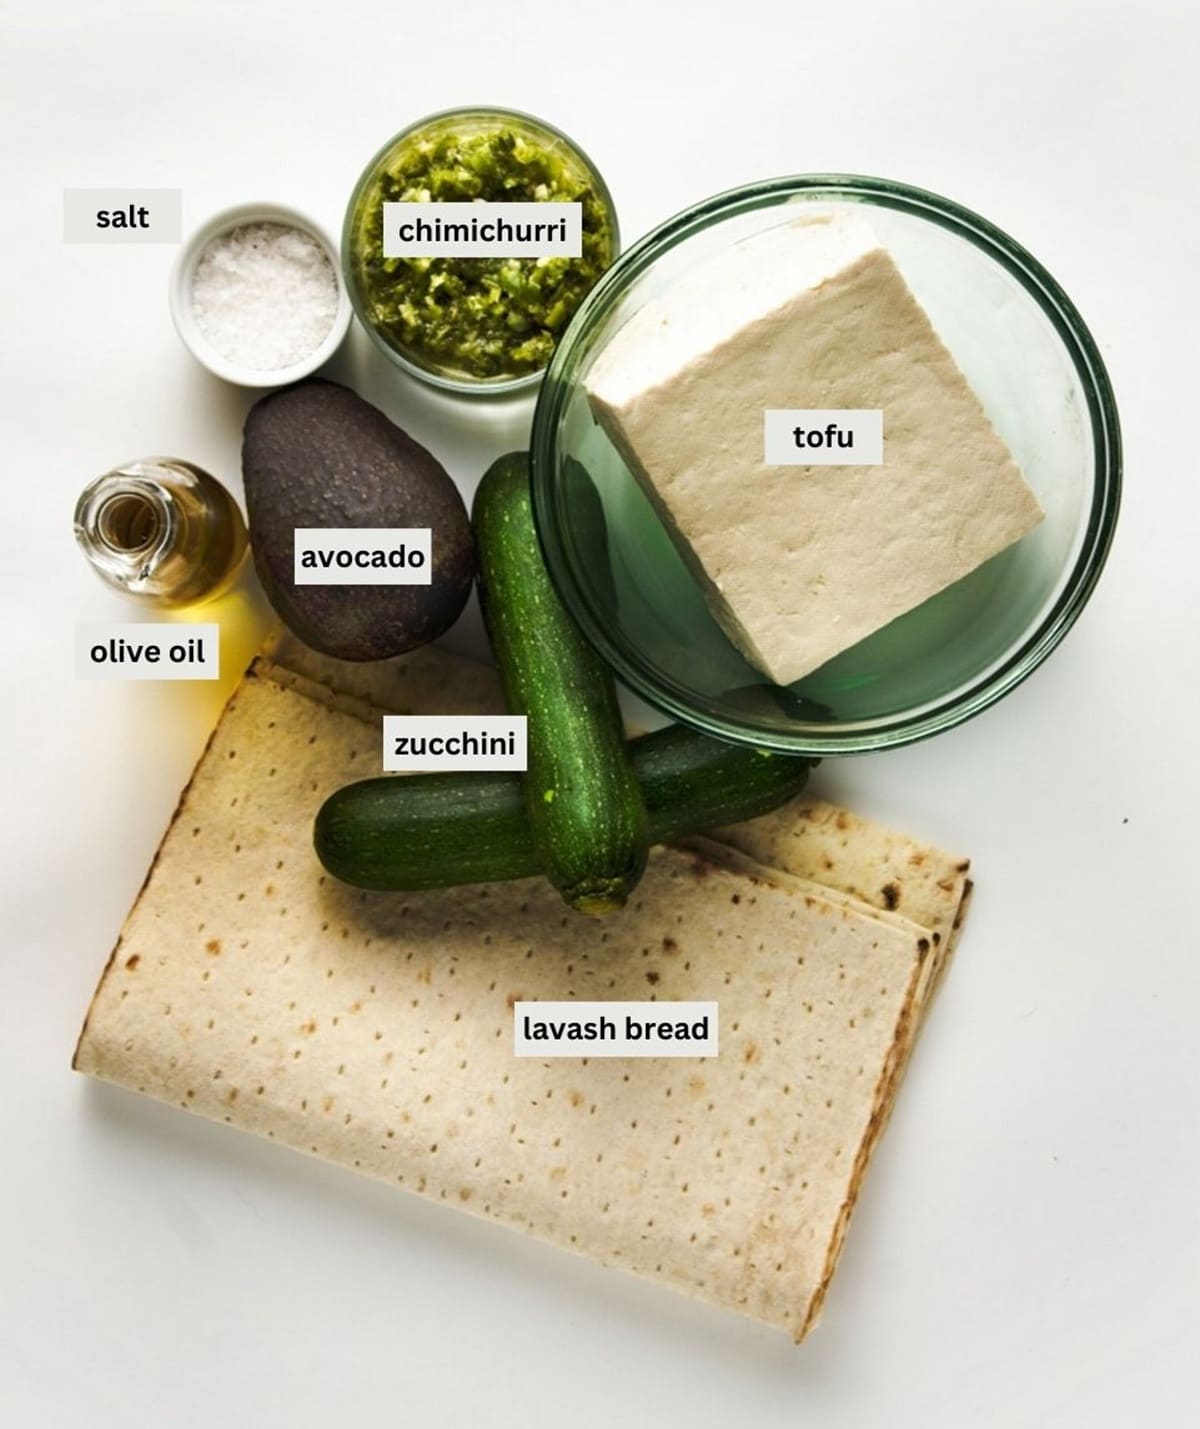 Labeled ingredients for making grilled tofu and zucchini wraps on top of a white surface.